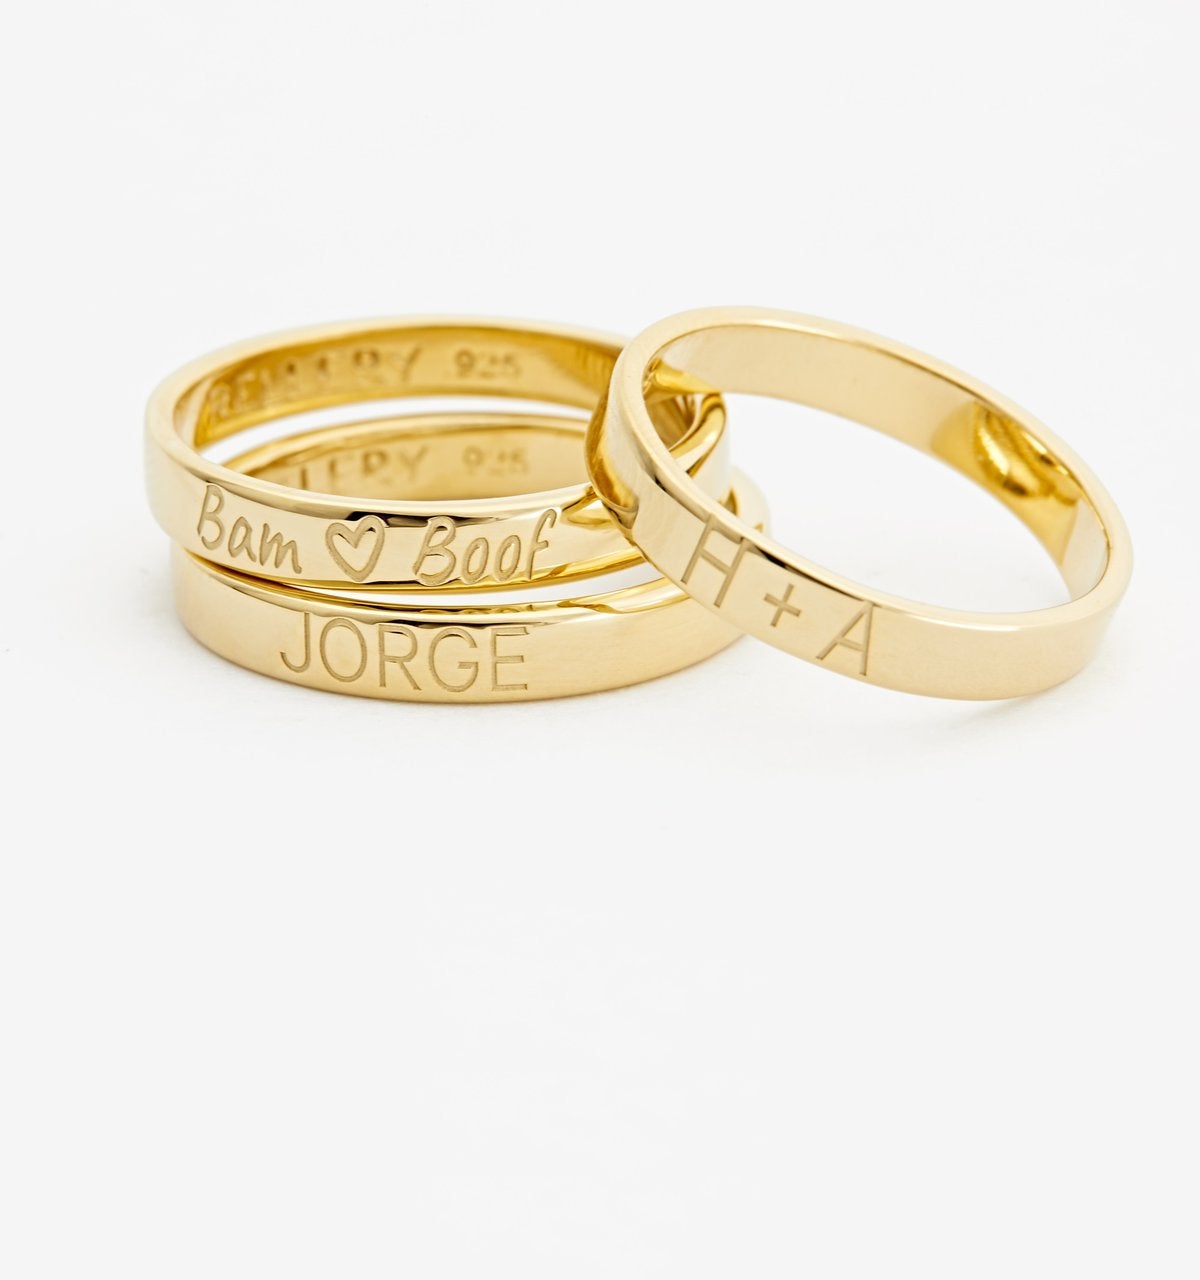 20 Very Sweet Personalized-Jewelry Gifts